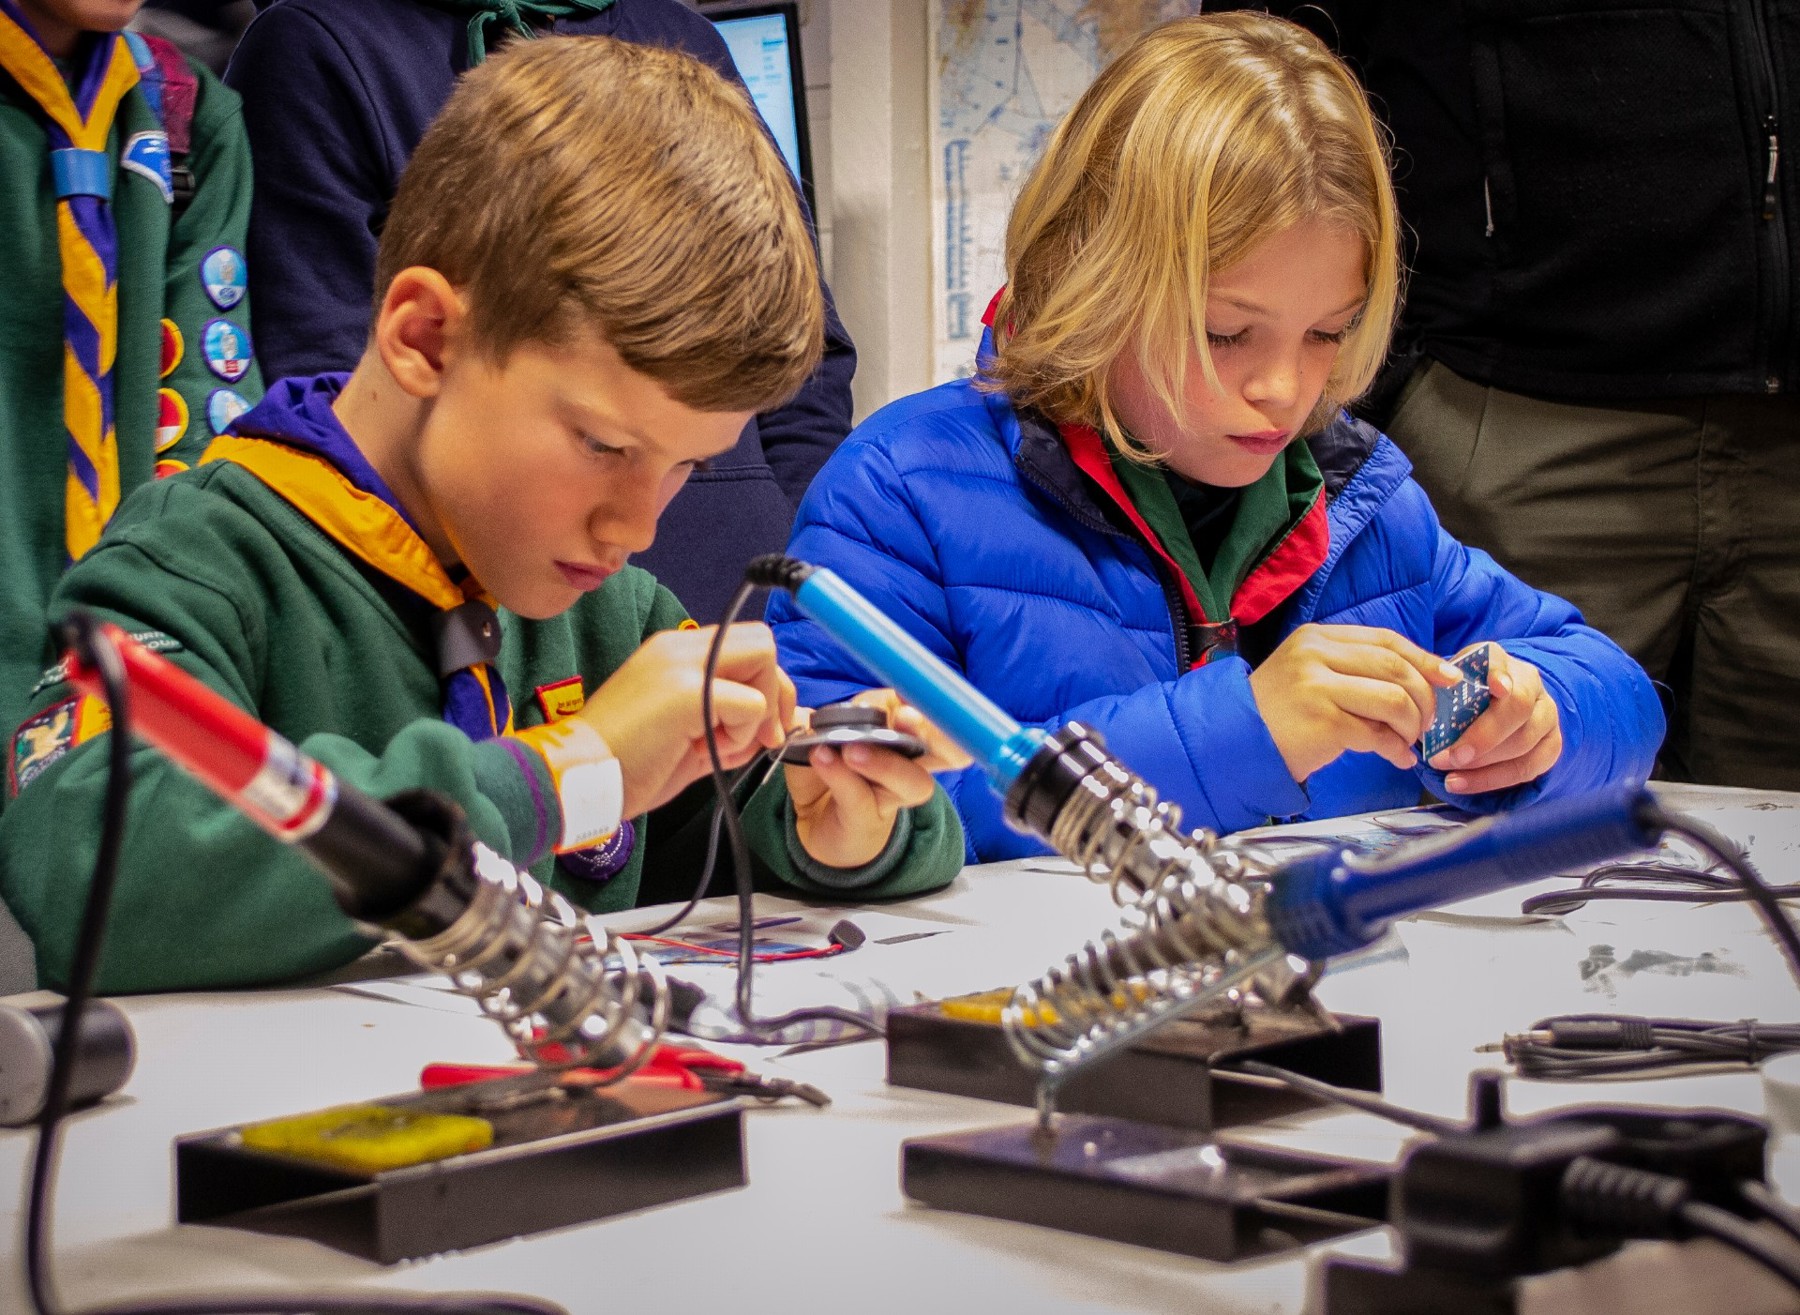 Two Scouts, one boy and one girl, are sat at a table building an electrical circuit. They are concentrating on the circuit boards and are sat with soldering irons.